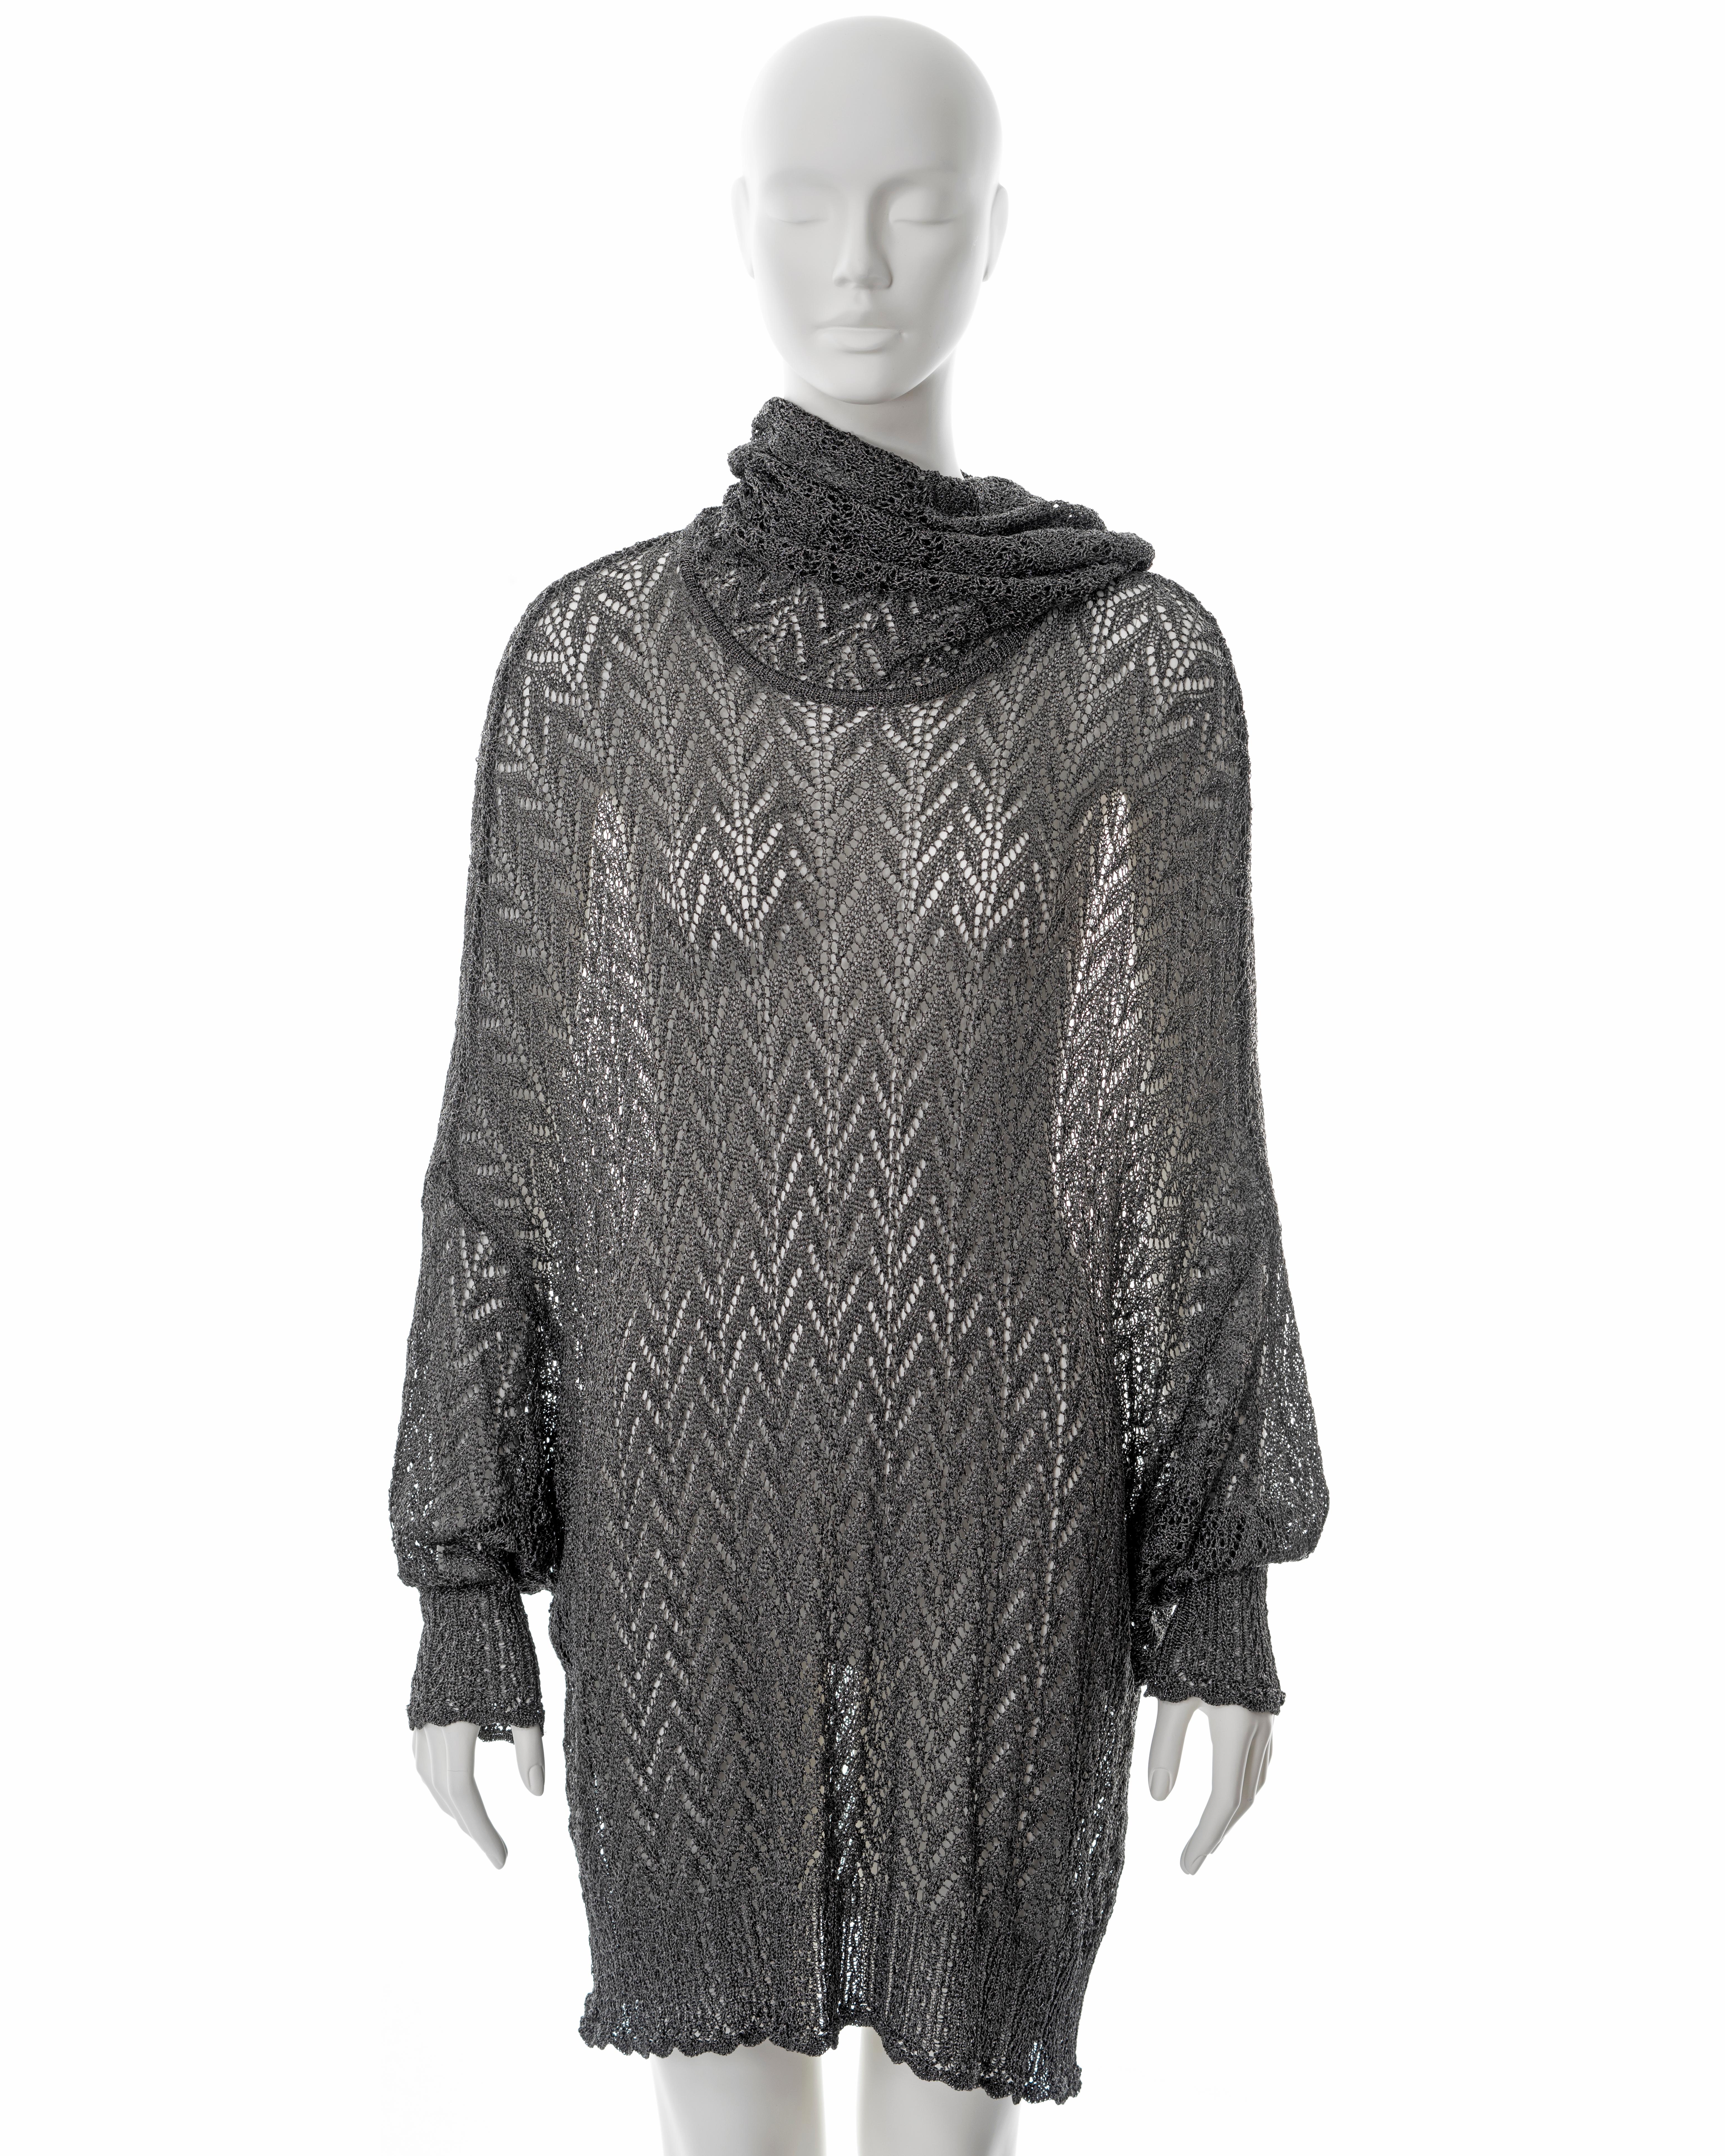 Christian Dior by John Galliano silver crochet sweater dress, fw 1998 In Excellent Condition For Sale In London, GB